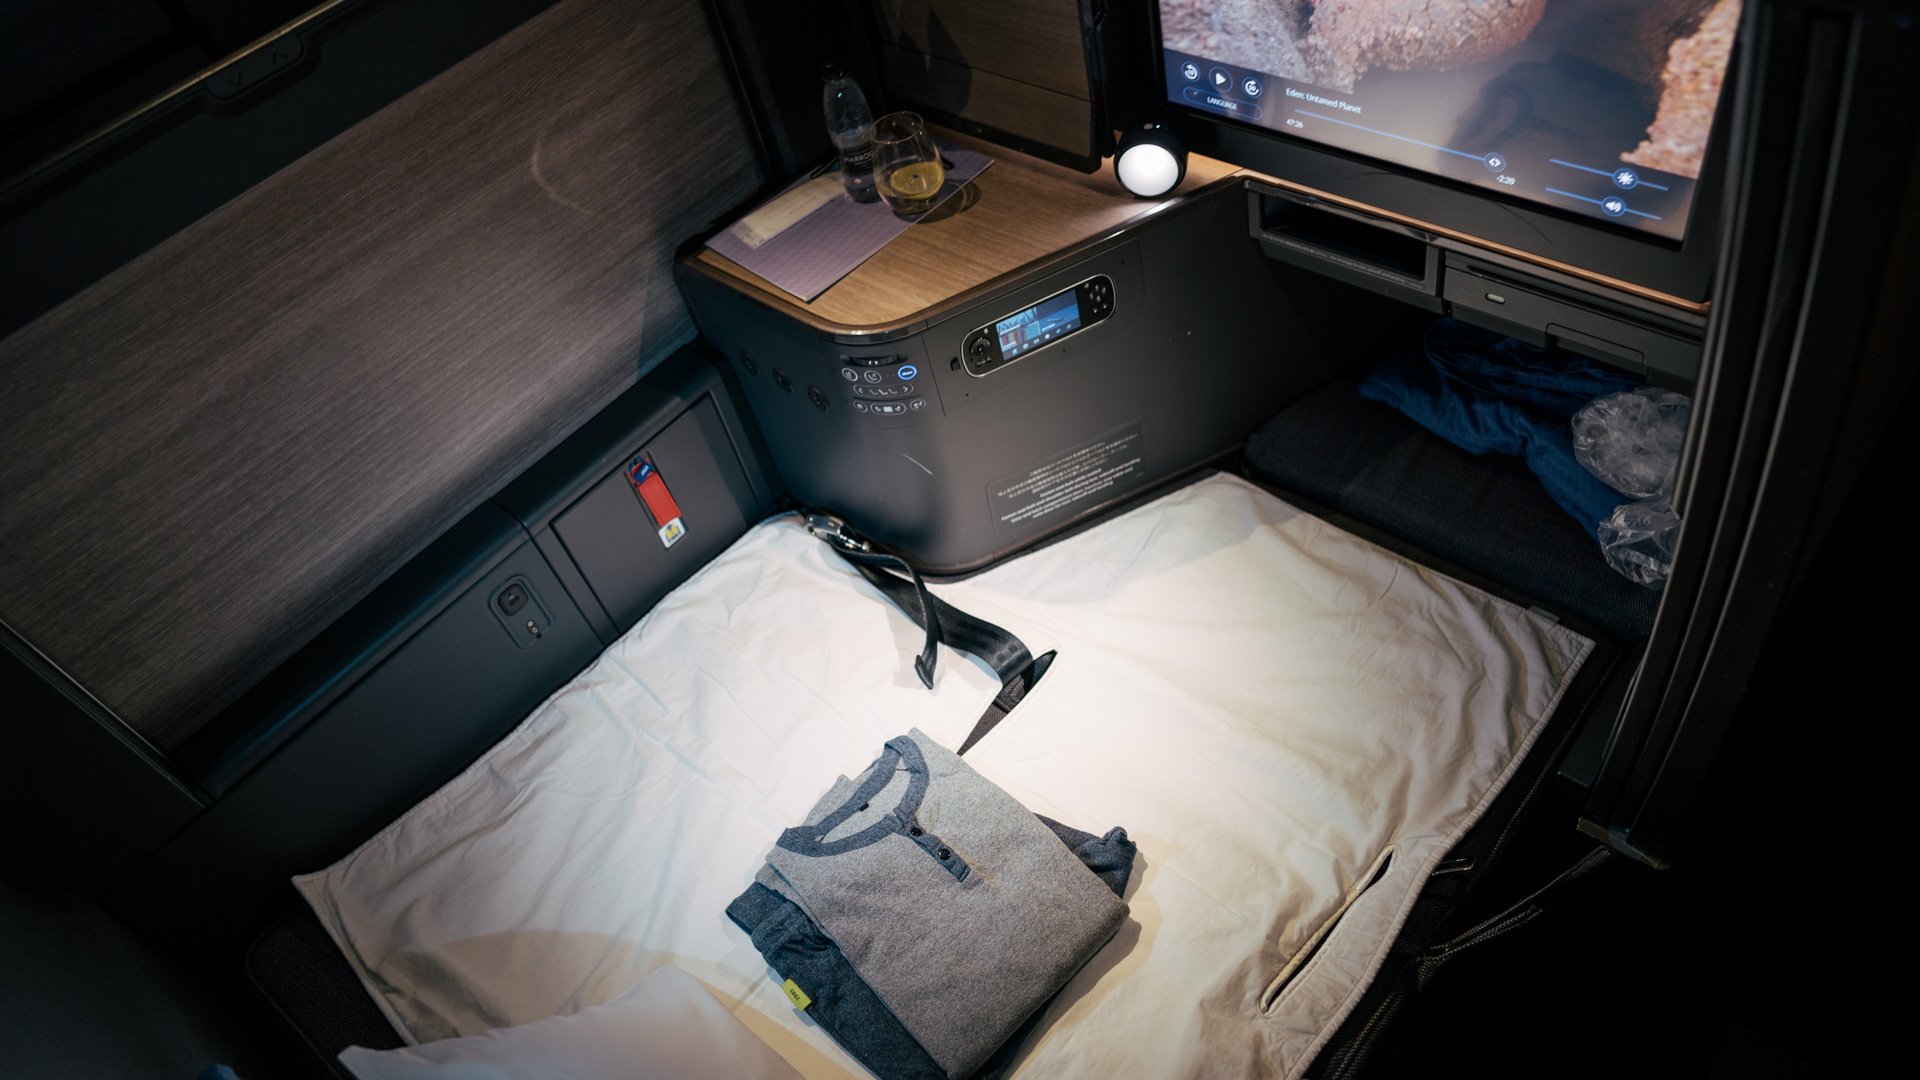 ANA Boeing 777 Business Class bed